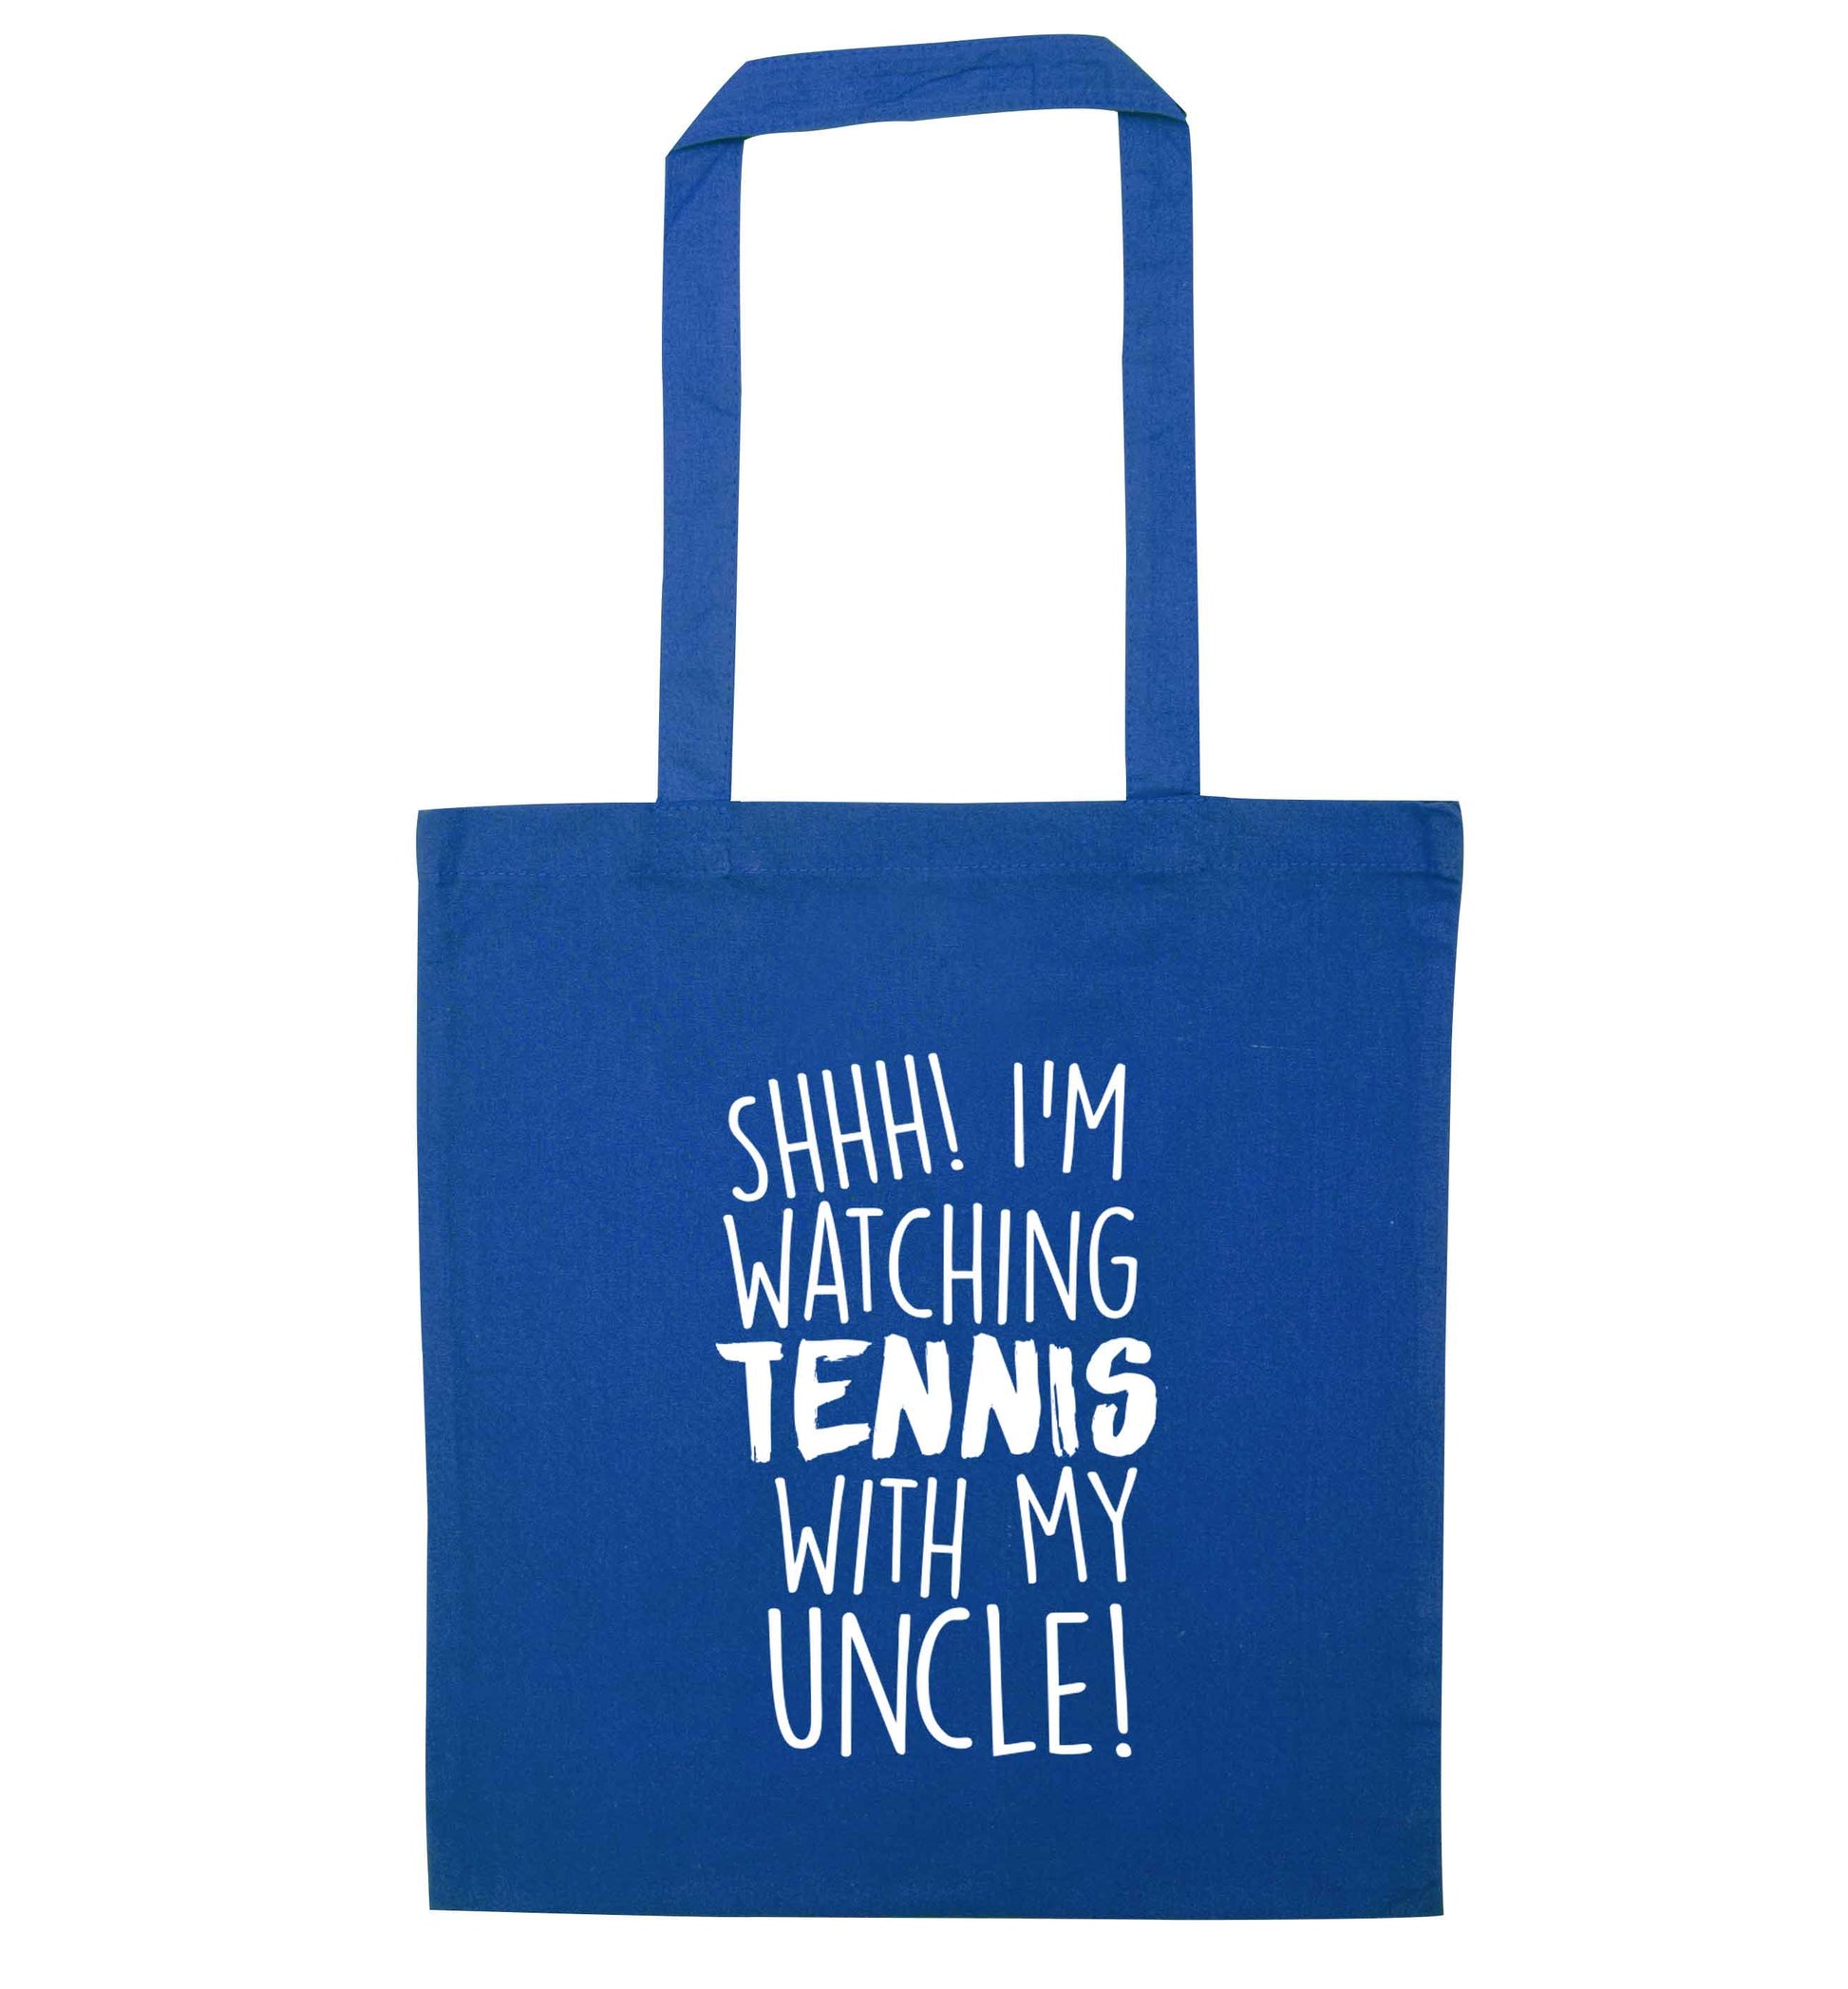 Shh! I'm watching tennis with my uncle! blue tote bag